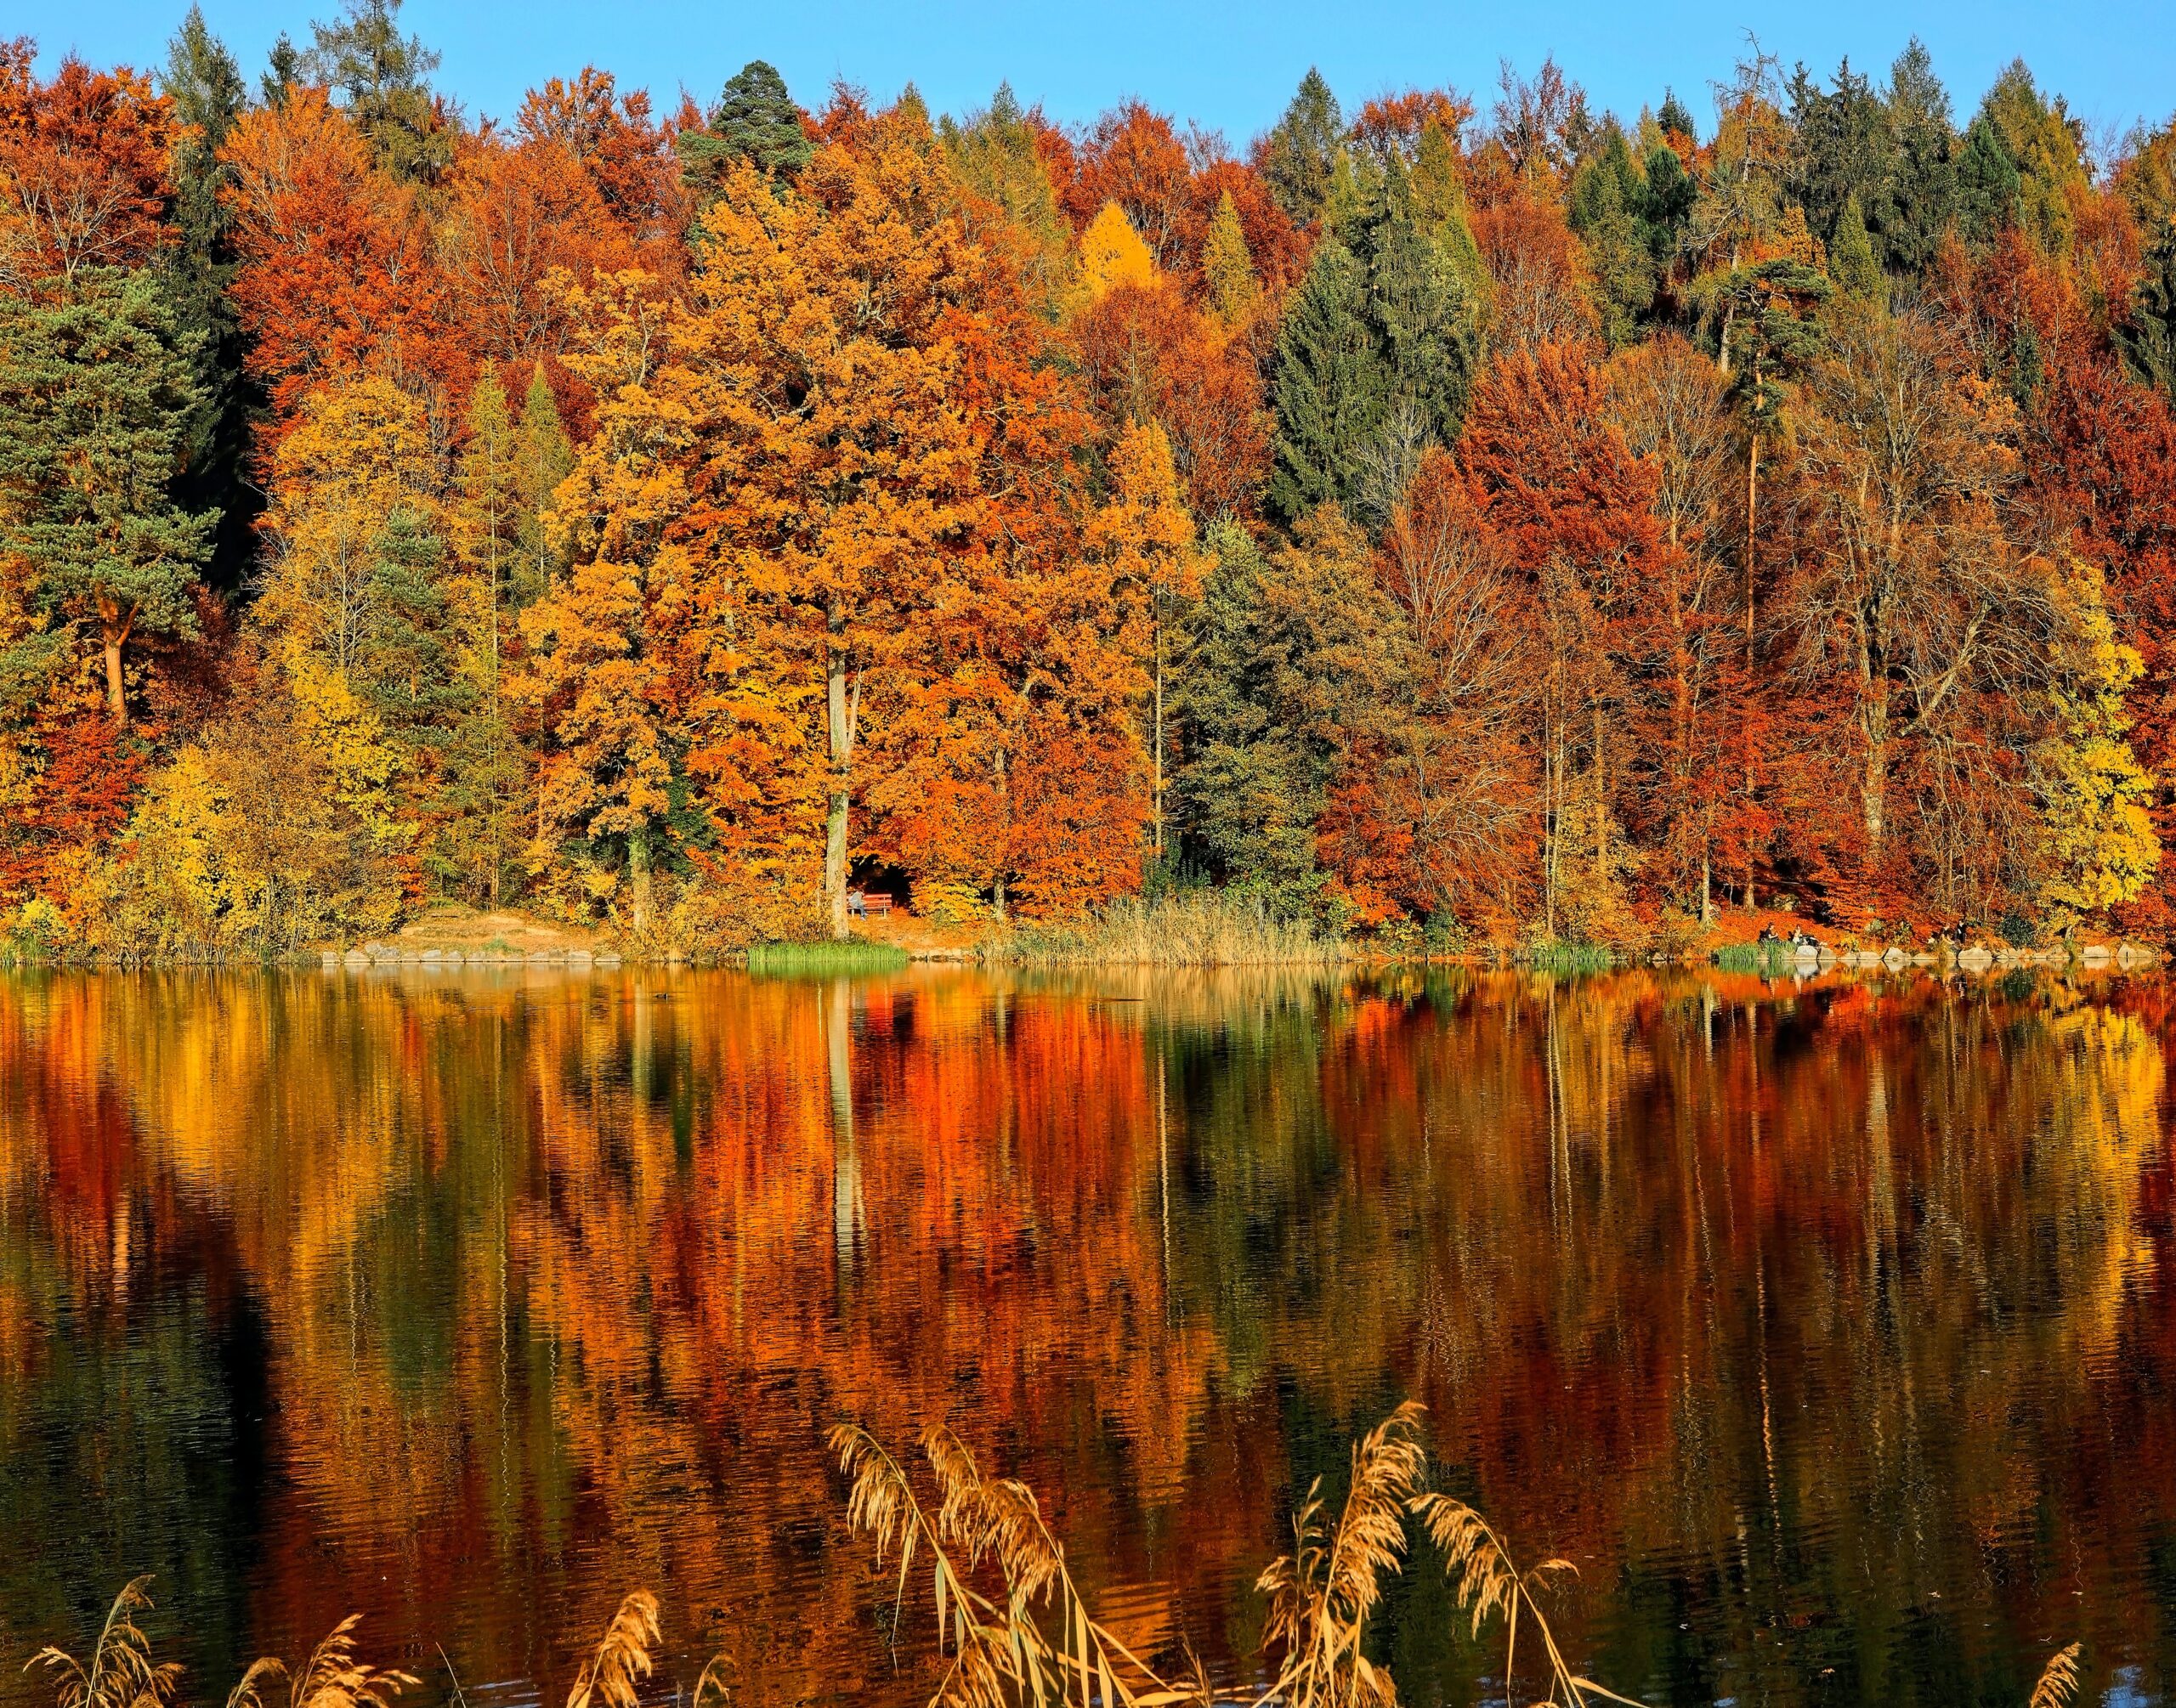 Fall scenery with lake and trees in the background